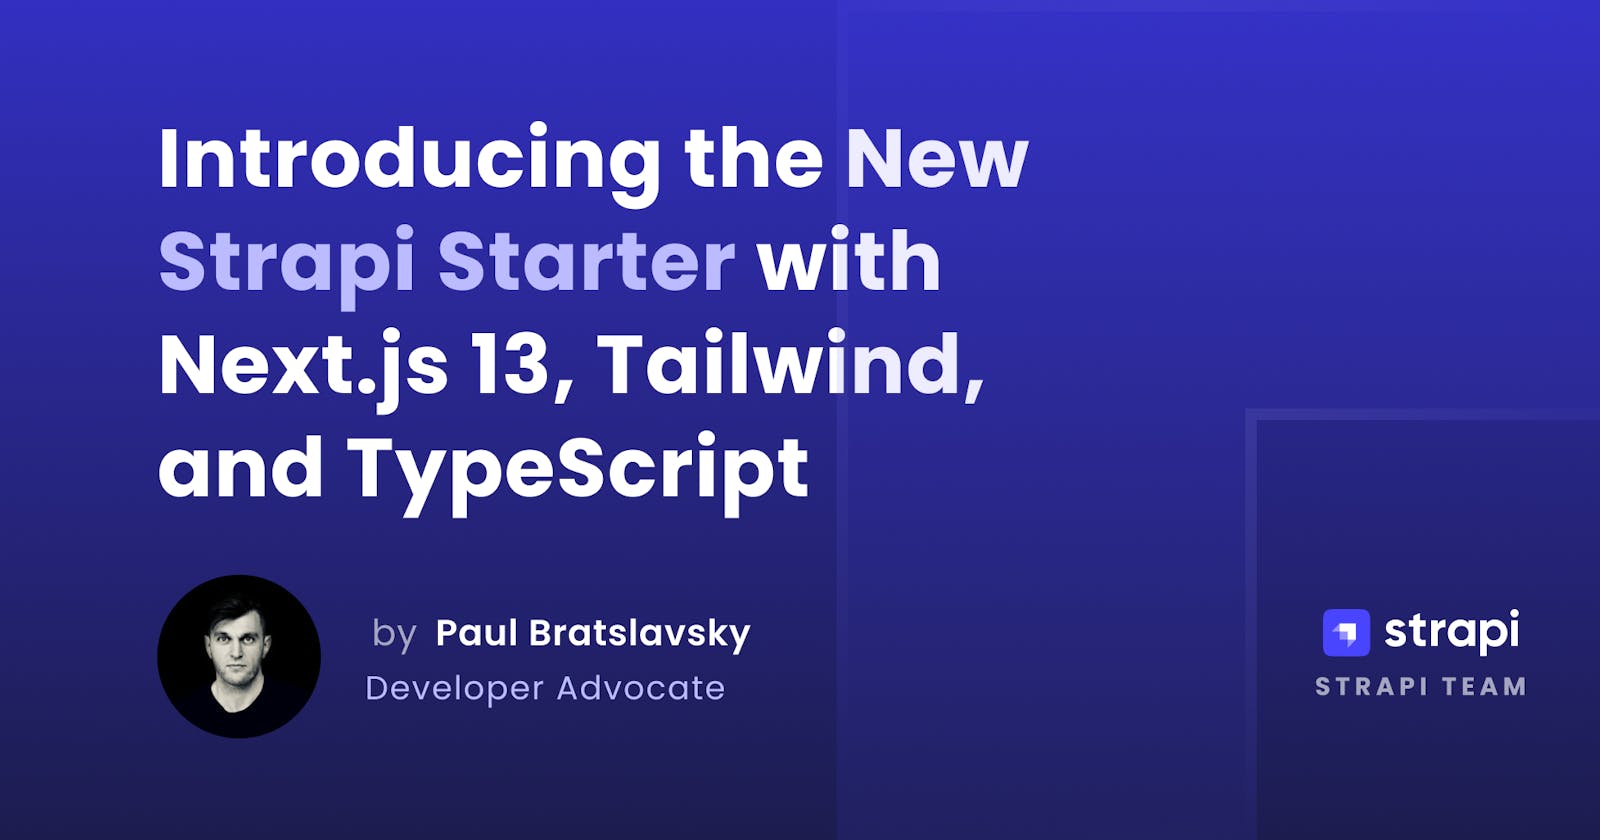 Introducing the New Strapi Starter with Next.js 13, Tailwind, and TypeScript